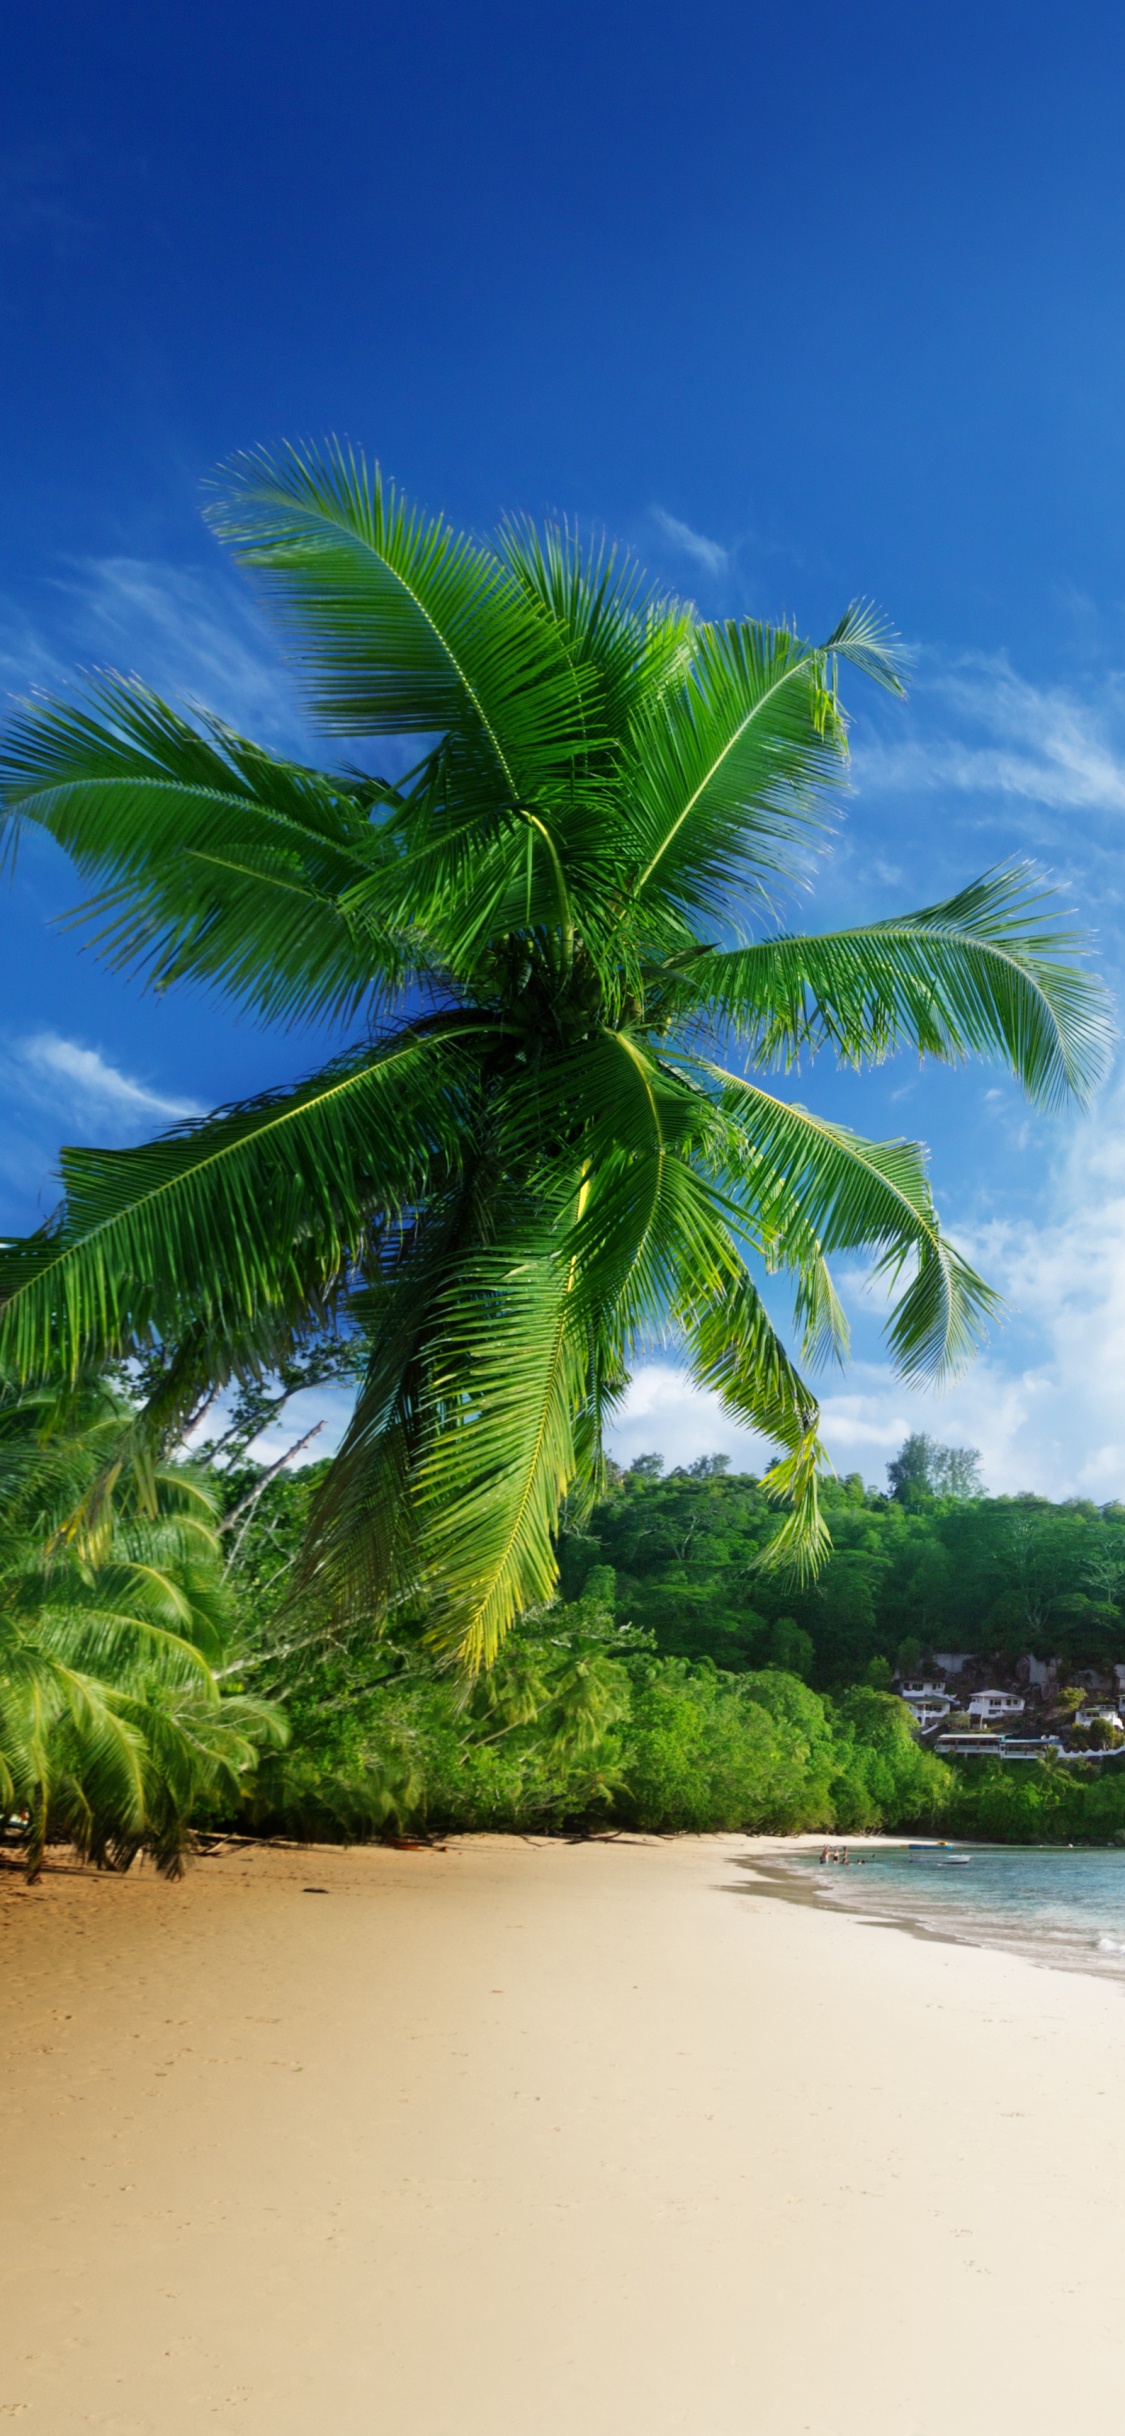 Green Palm Tree on White Sand Beach During Daytime. Wallpaper in 1125x2436 Resolution